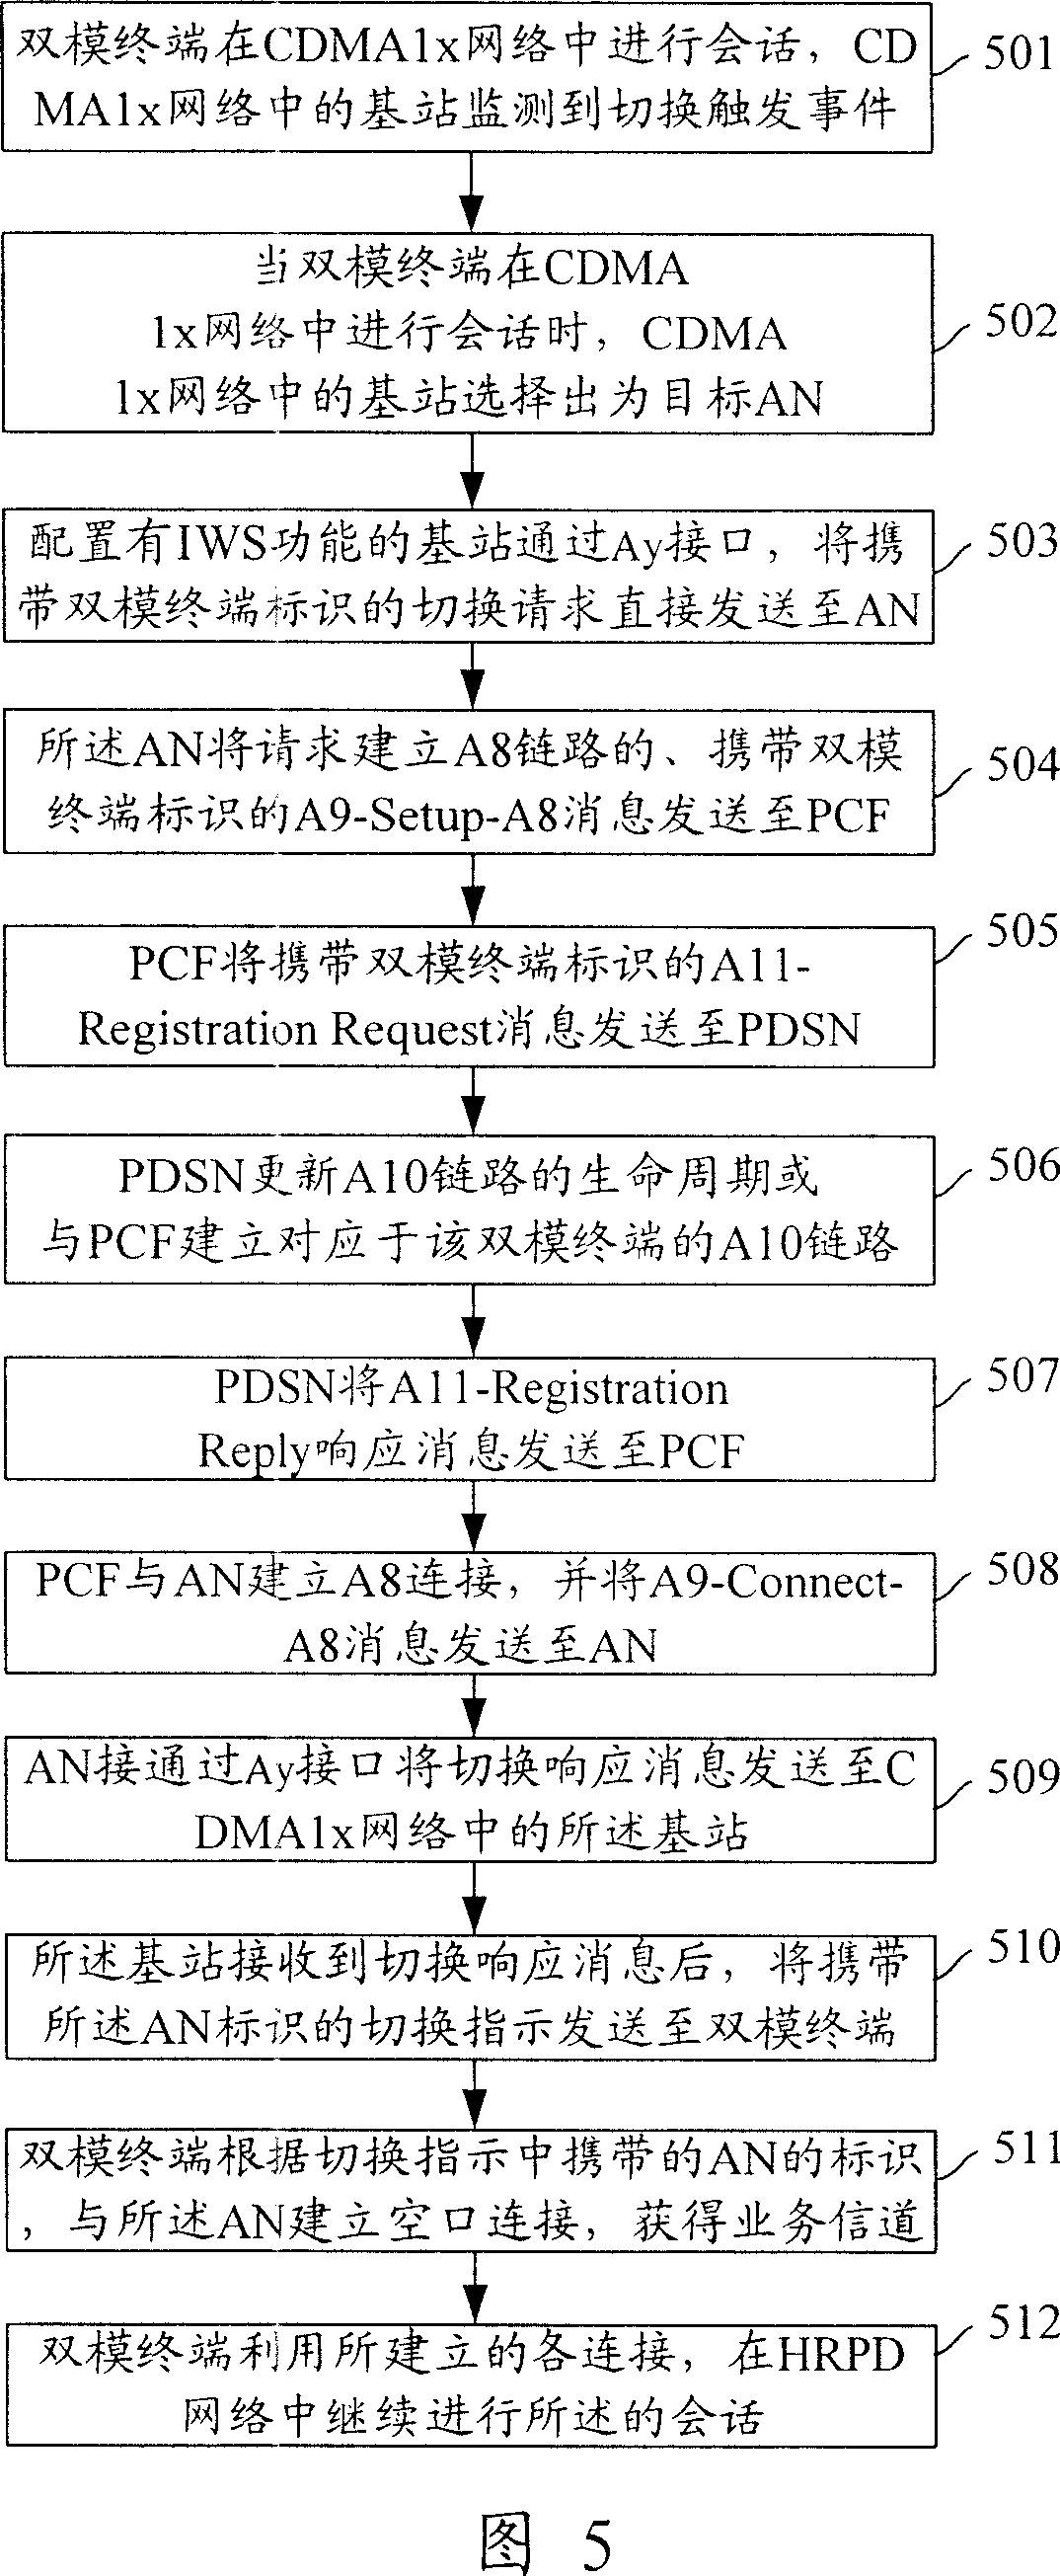 Method and system for switching conversation to high-speed packet data network